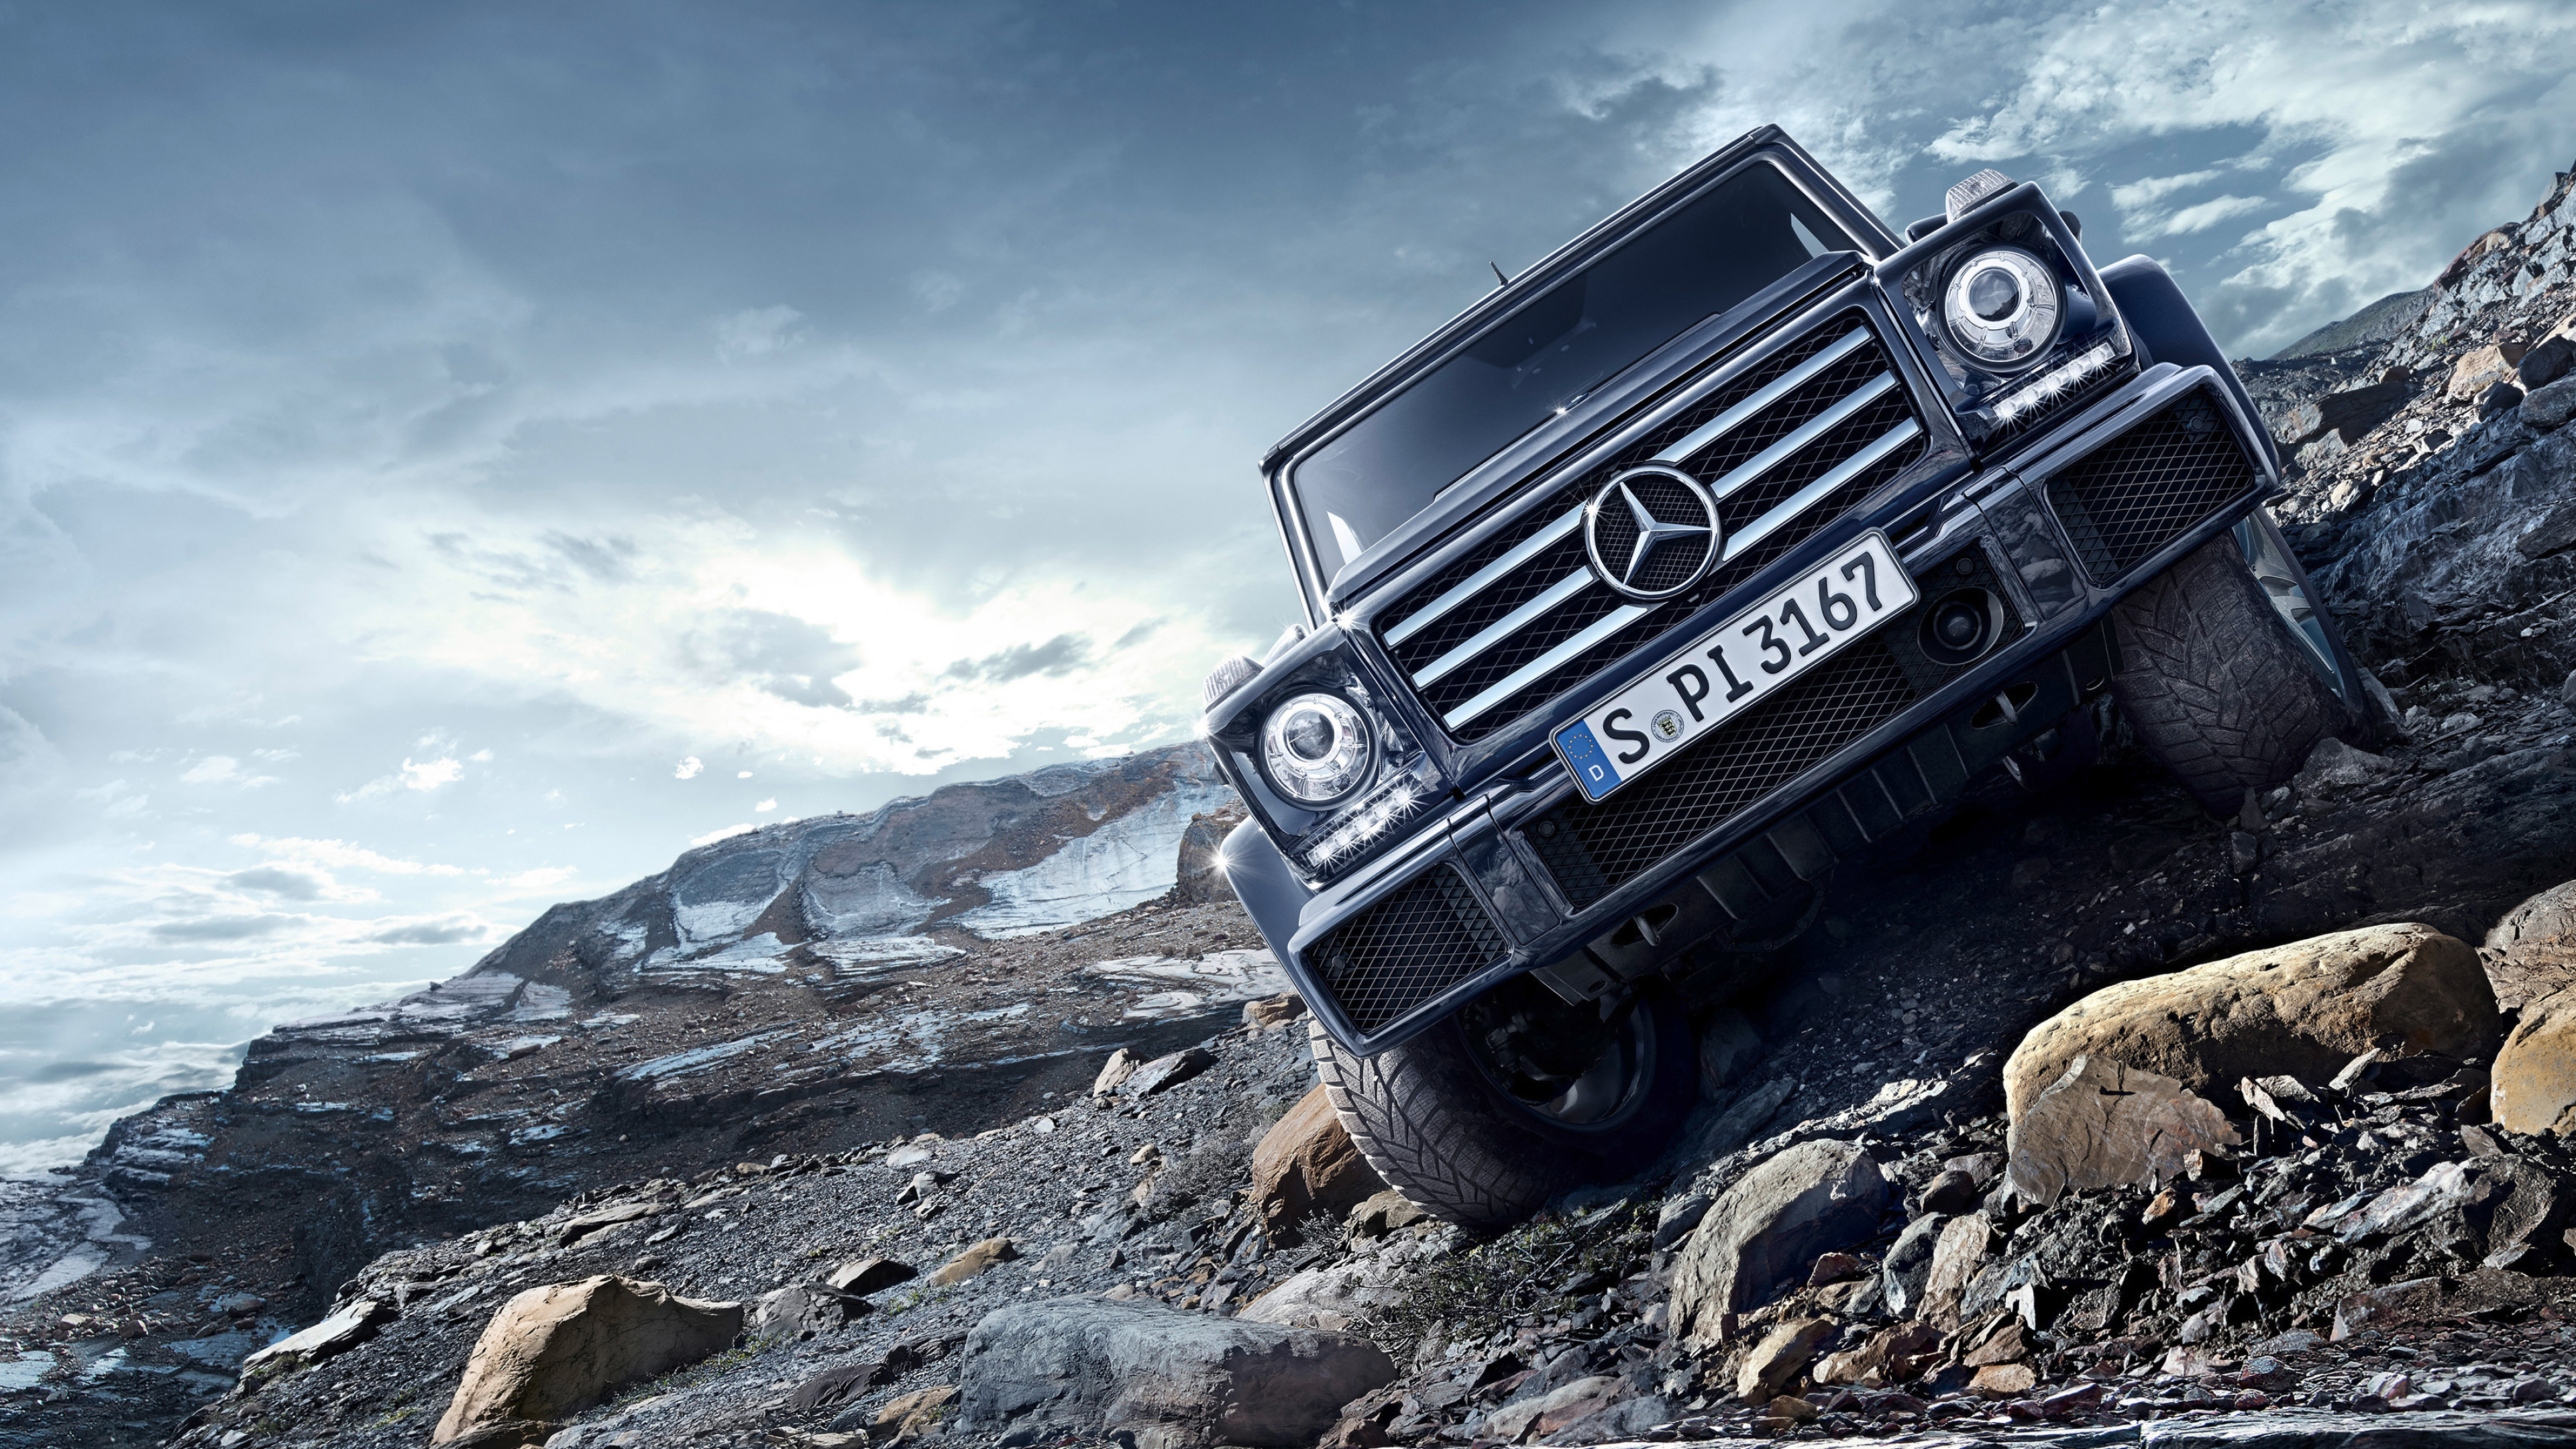 Off-road Driving: Mercedes-Benz G-Class, Off-road tires, A strengthened drive-train. 3840x2160 4K Background.